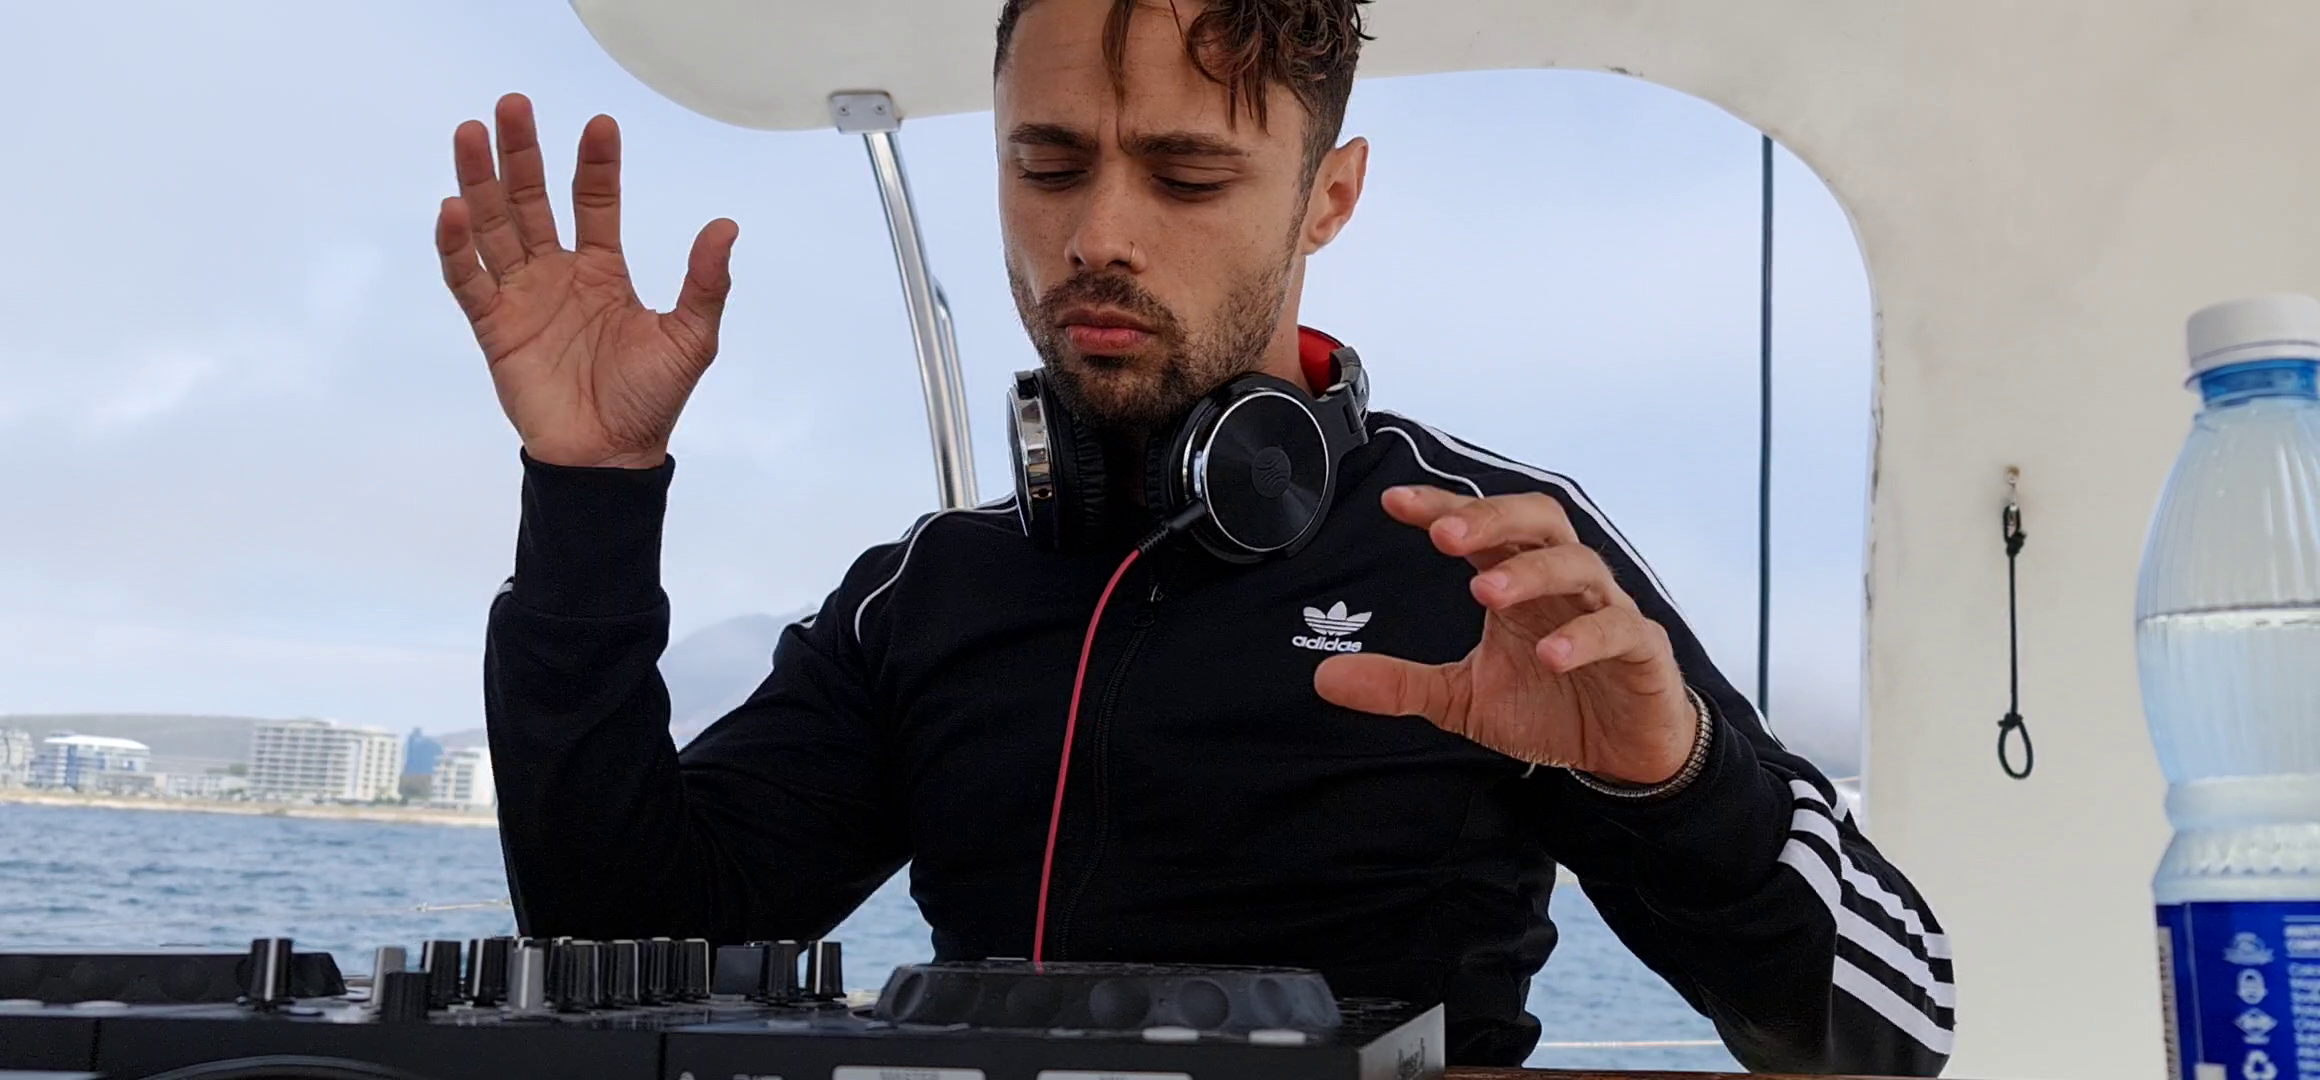 Pando G DJing on boat in Cape Town, South Africa #TEAMPERDITIO #DarkGroove Dark Groove